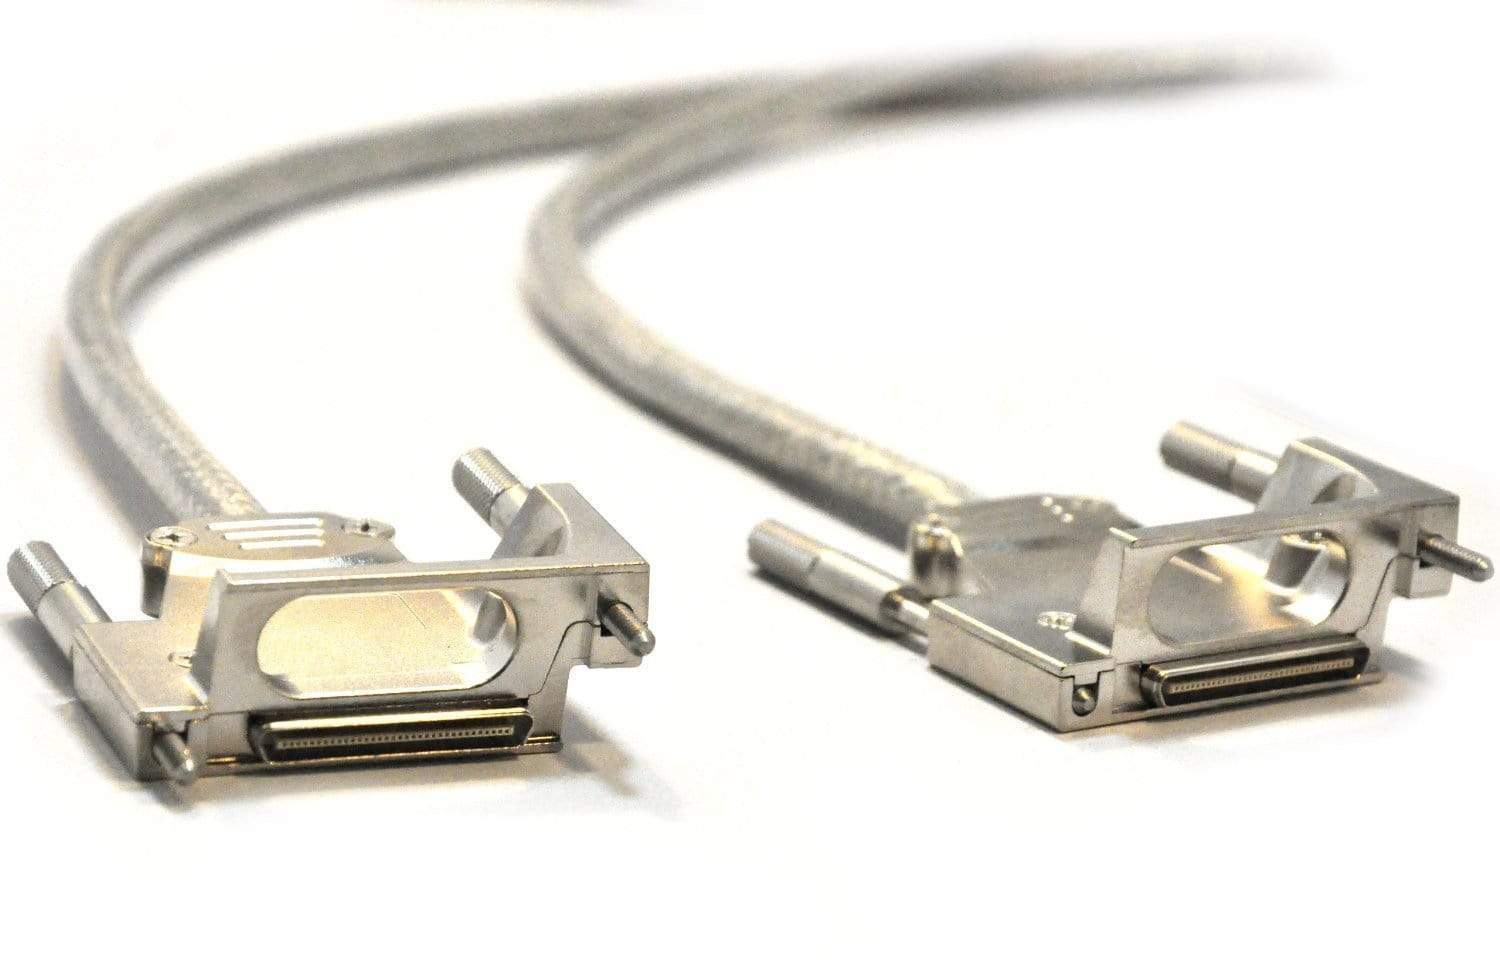 cisco-50cm-3750-stacking-cable-cab-stack-50cm-746320821290-7697317822534.jpg